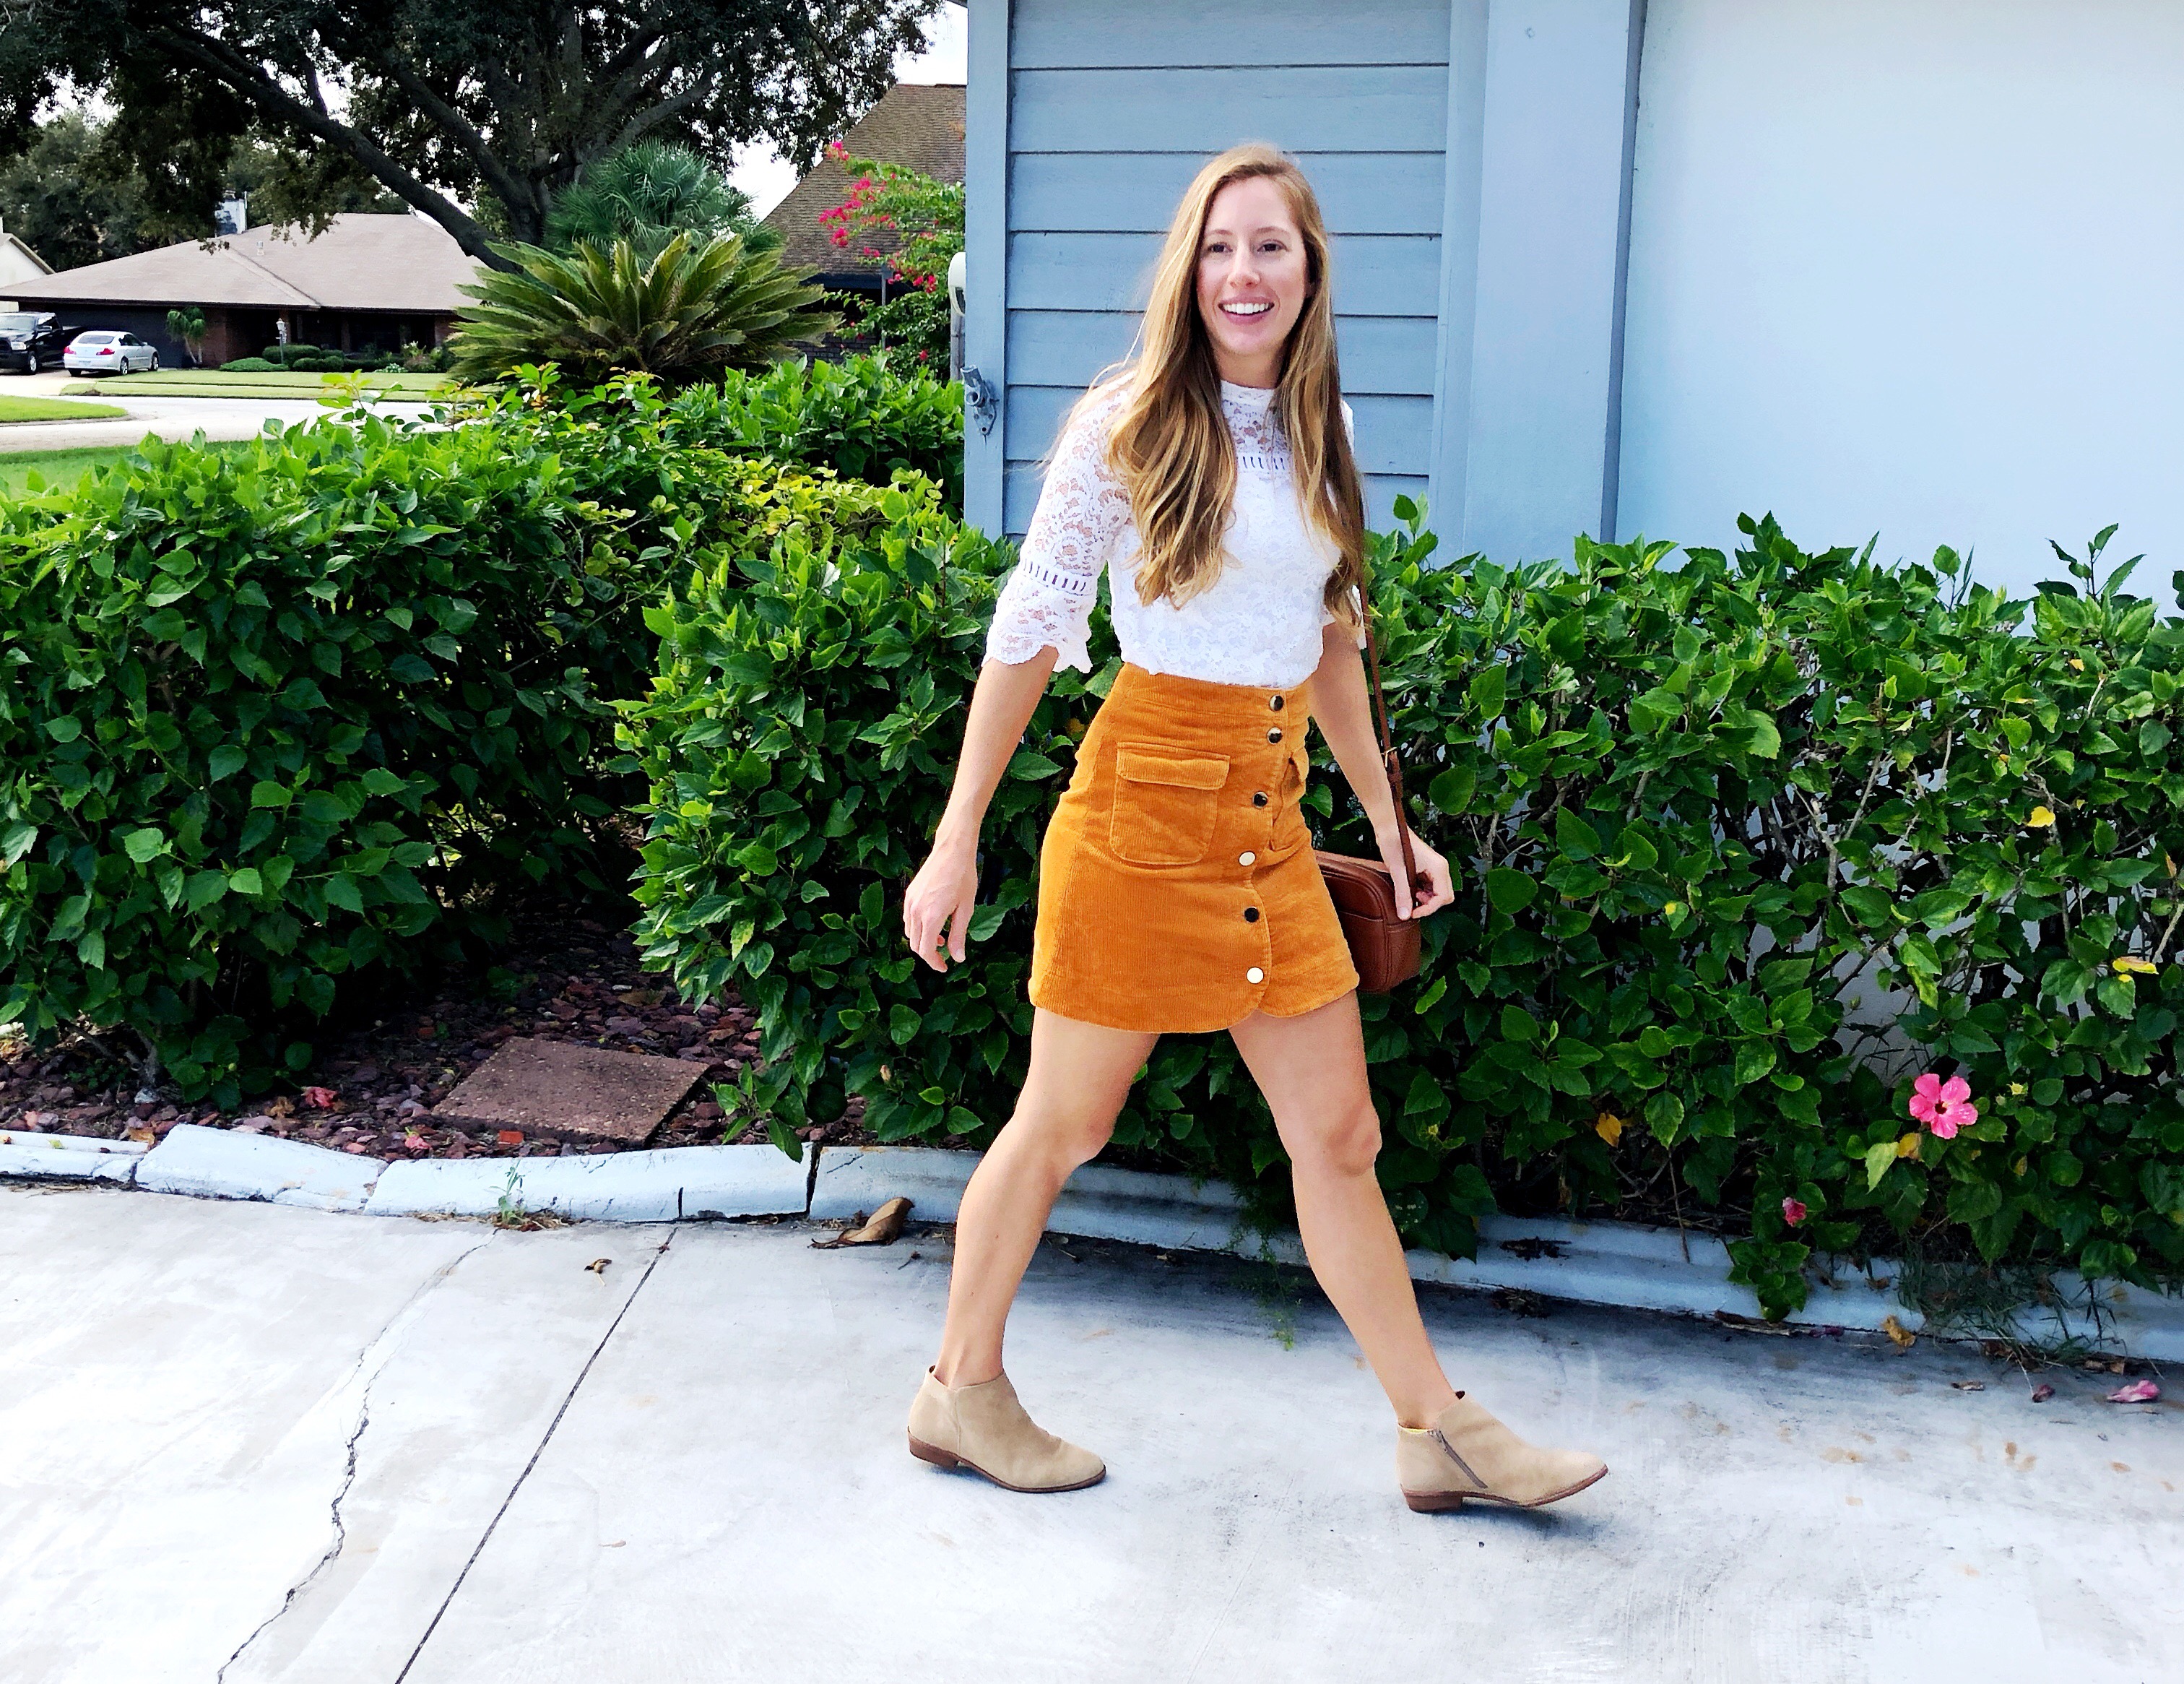 How to Style a Lace Top for Fall | How to Wear a Lace Top for Fall | Suede Skirt | Corduroy Skirt | How to Dress for Fall in Warm Weather - Sunshine Style